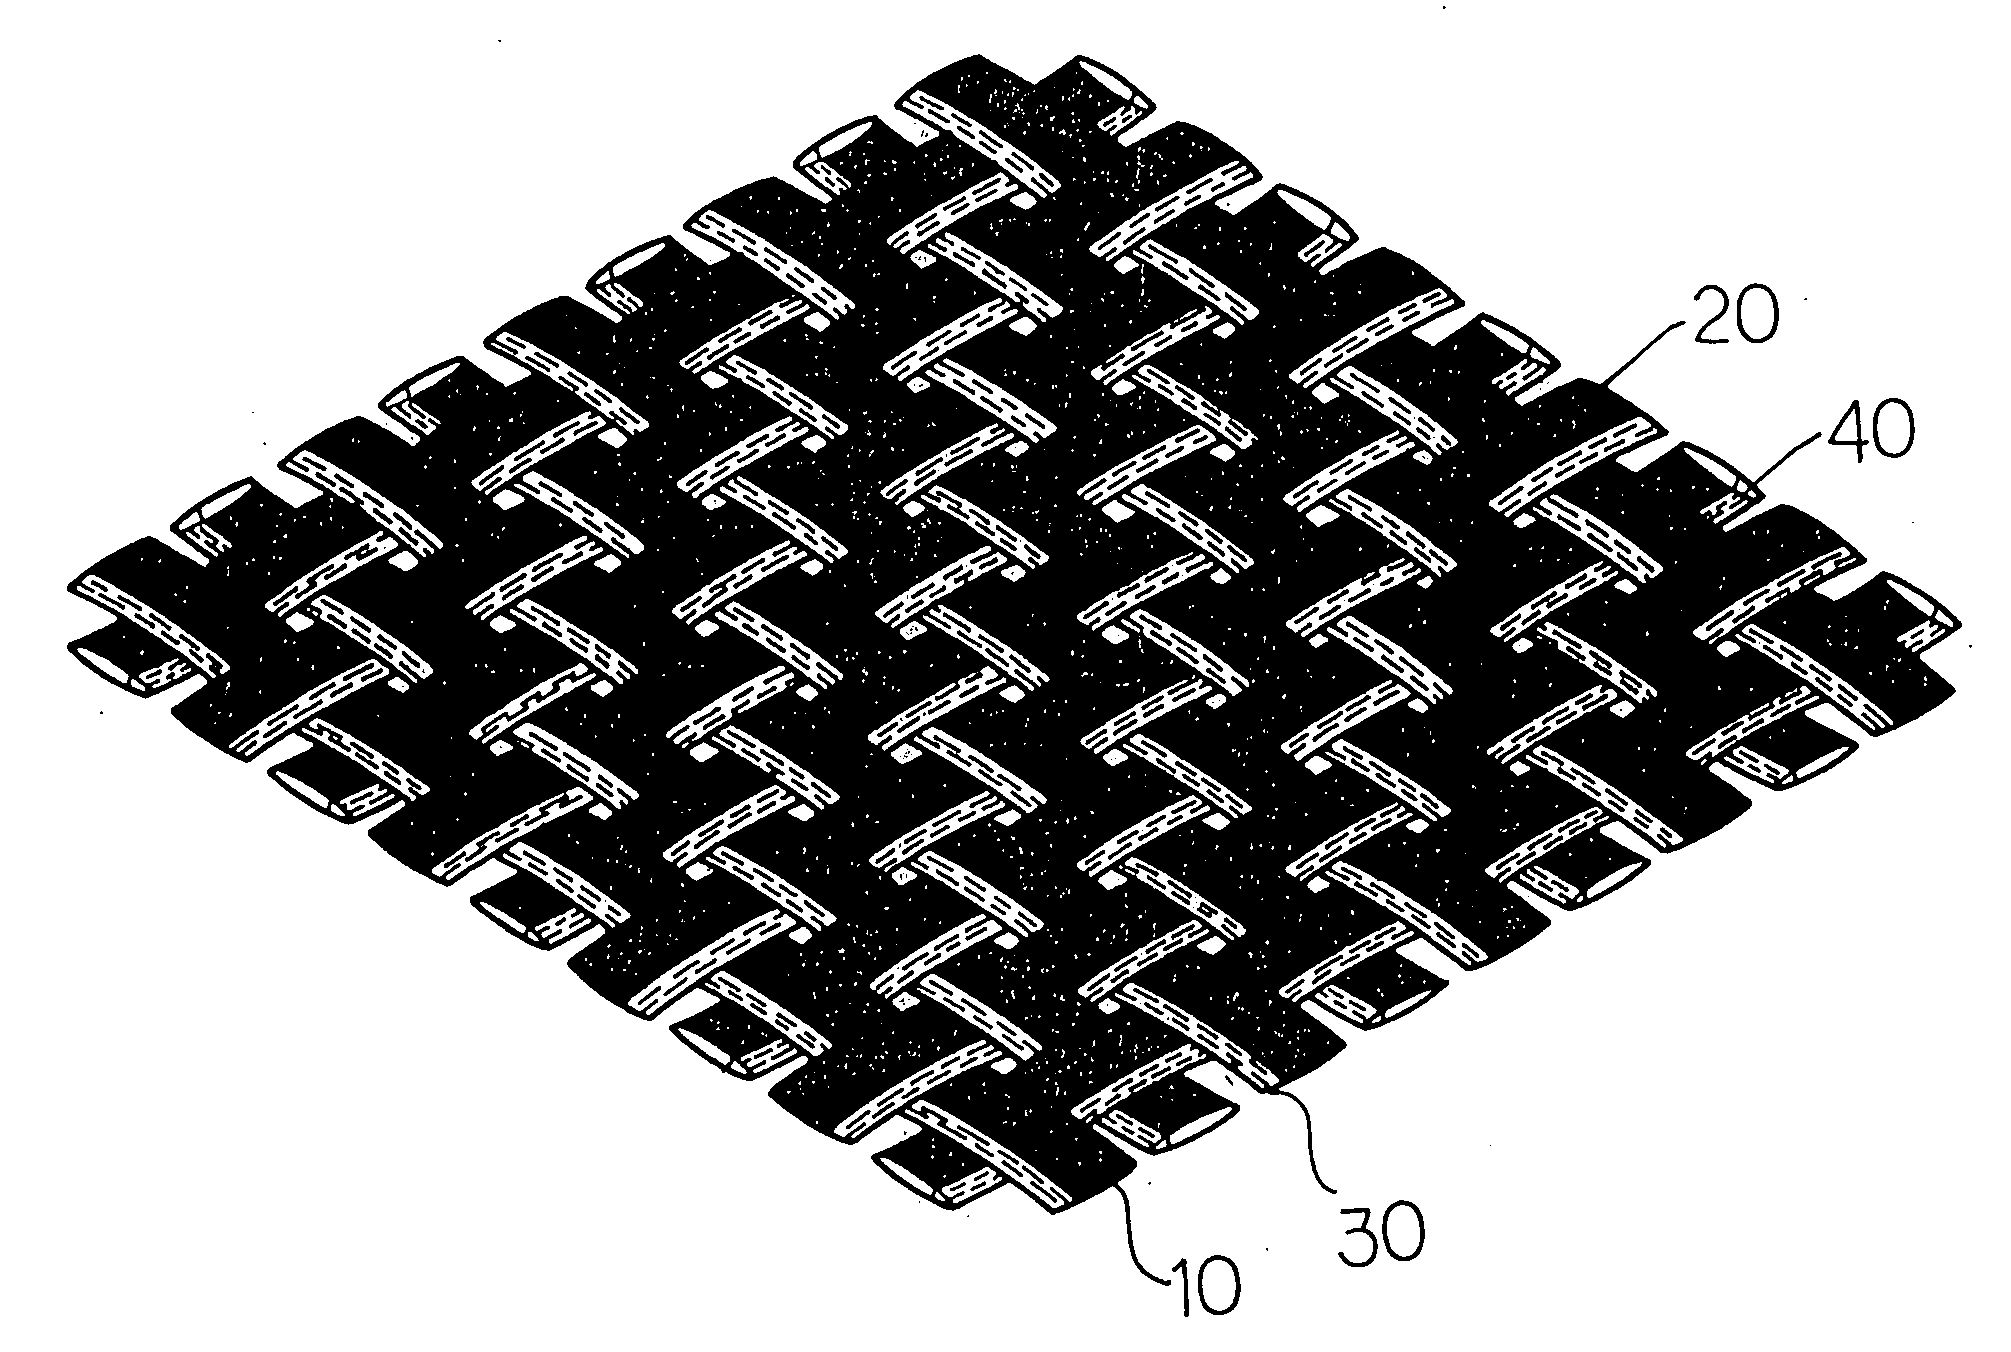 Structure of carbon cloth